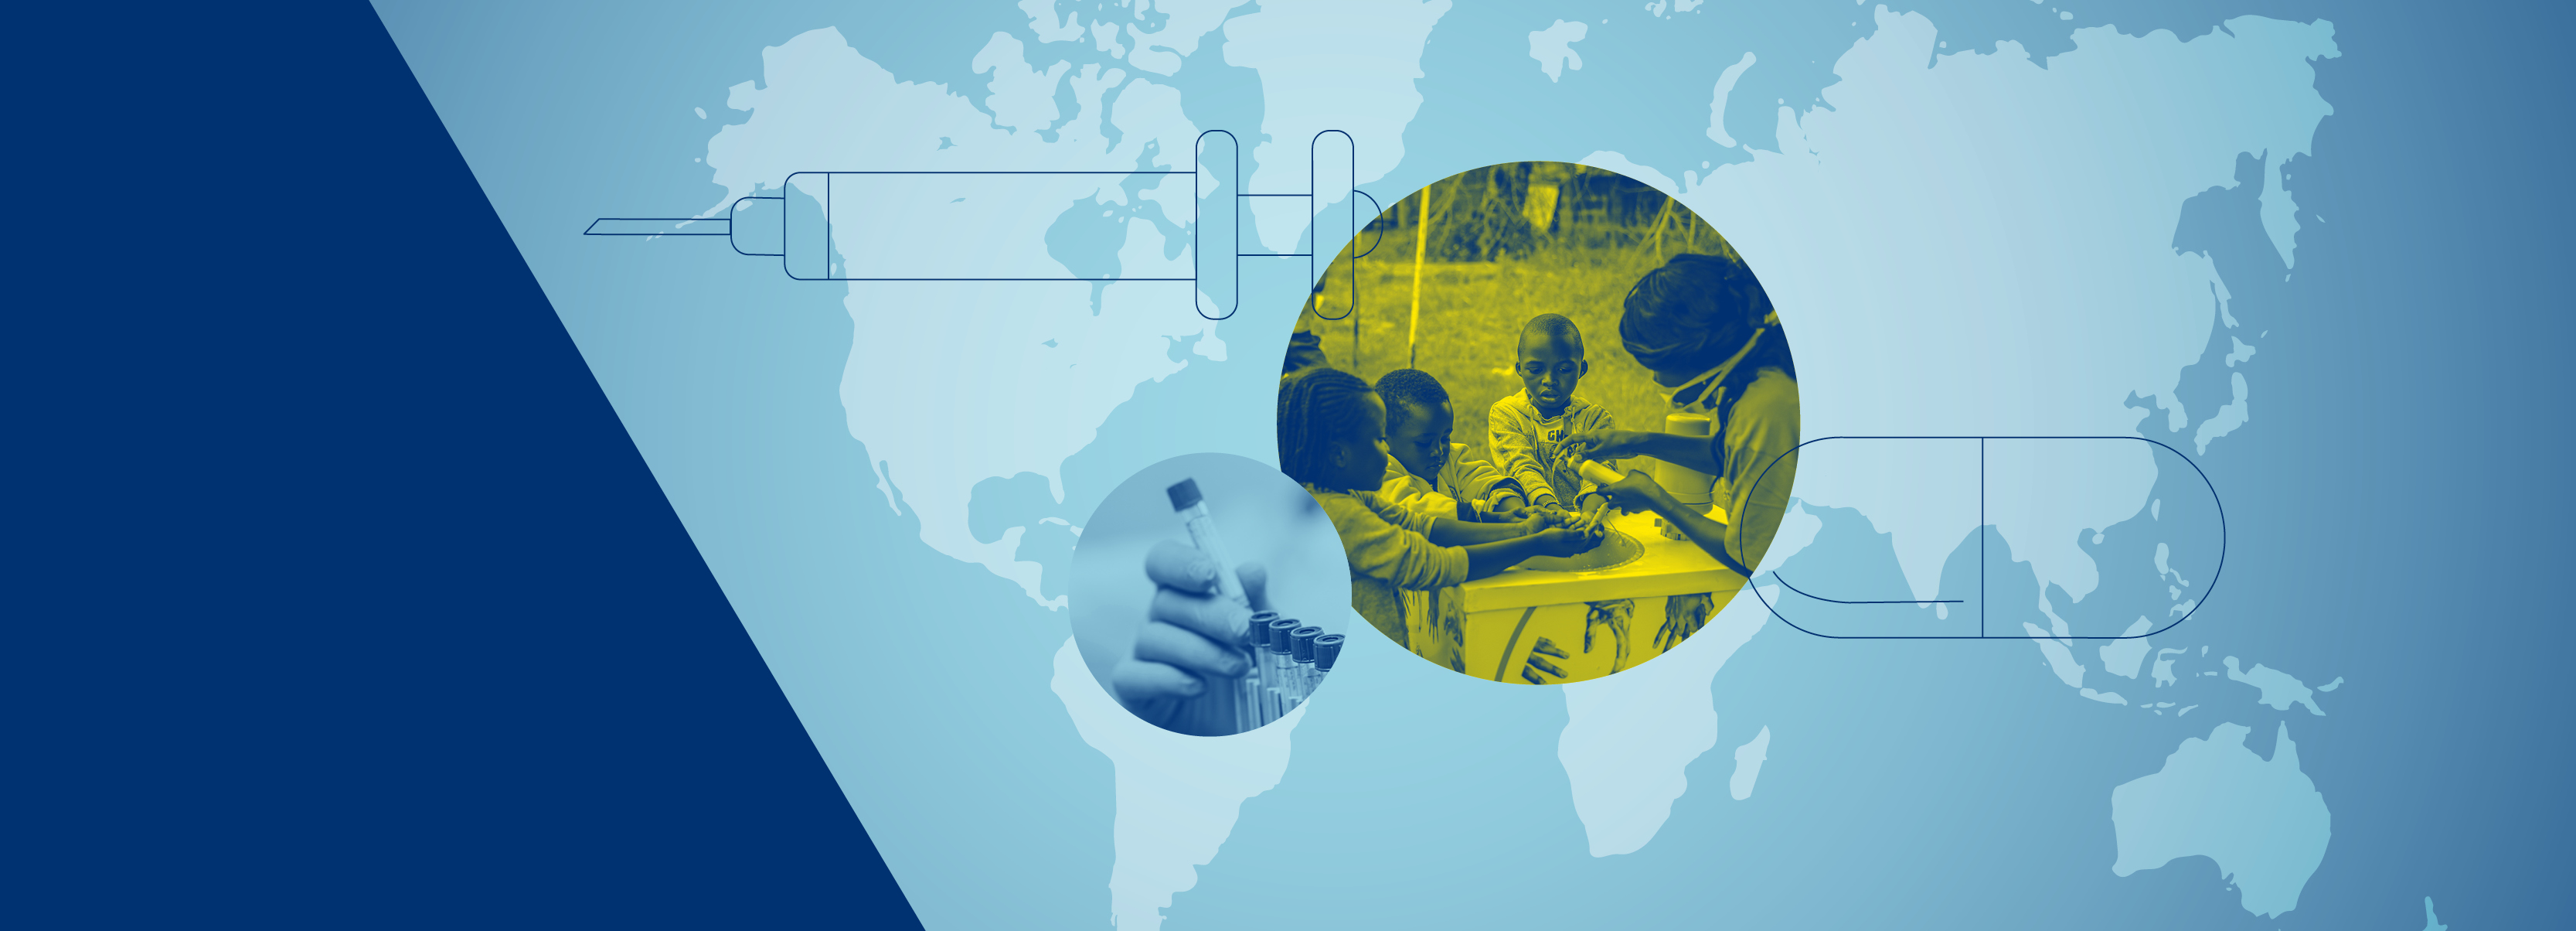 Graphic showing a map of the world, a hand holding a test tube and three children washing their hands